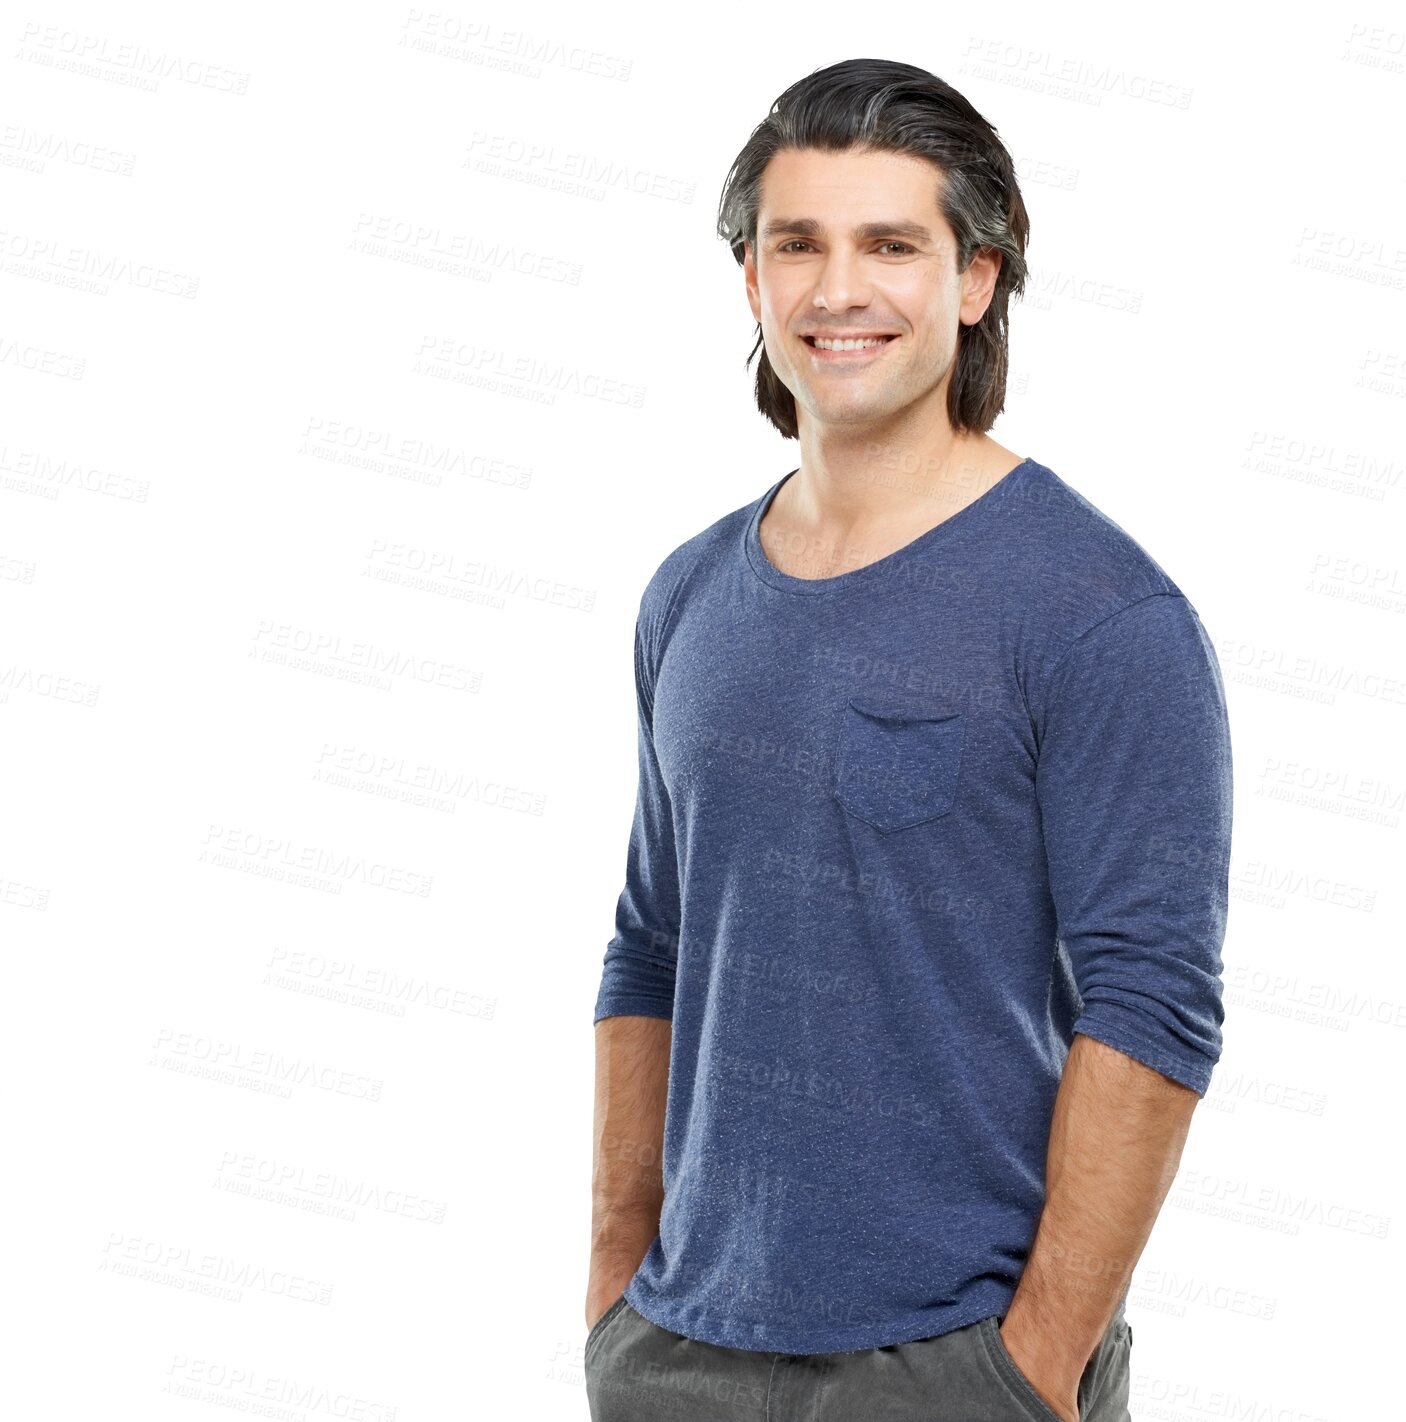 Buy stock photo Man, smile in portrait and casual fashion, confident and positive mature person isolated on transparent png background. Male model is happy, cotton tshirt and positivity, cool style with trendy hair